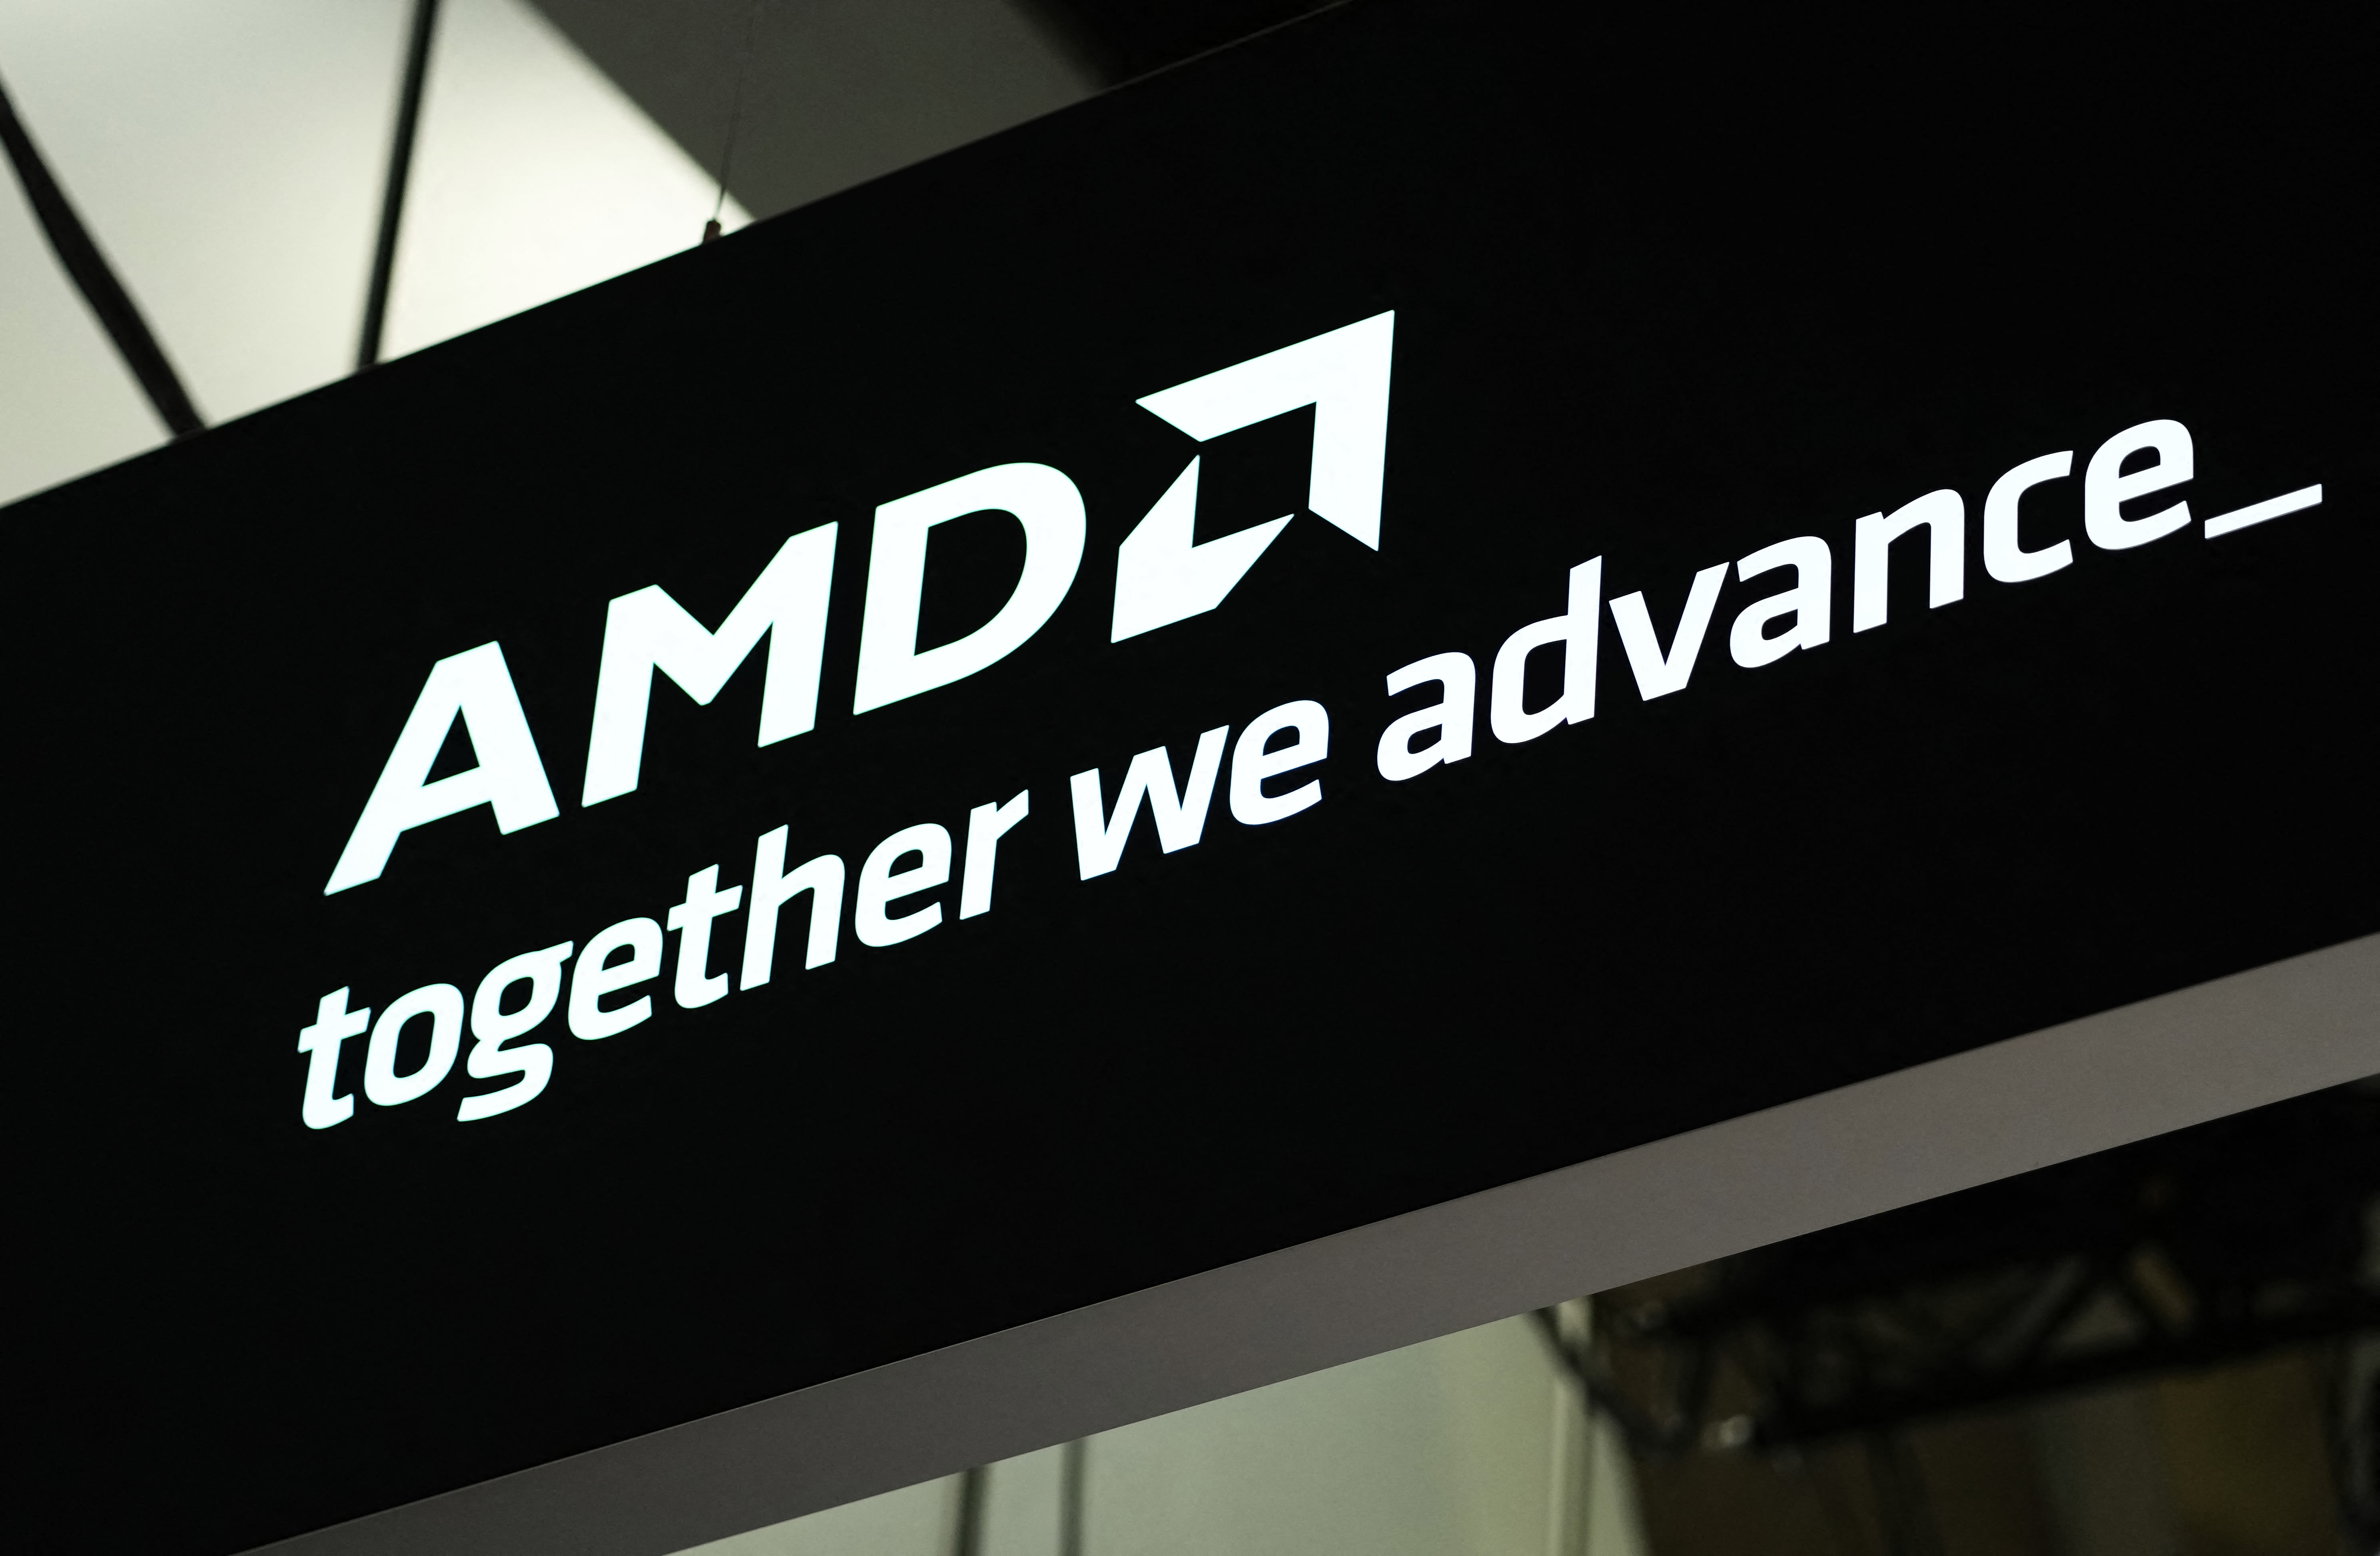 AMD beats on Q1 revenue and EPS, stock edges lower on light guidance